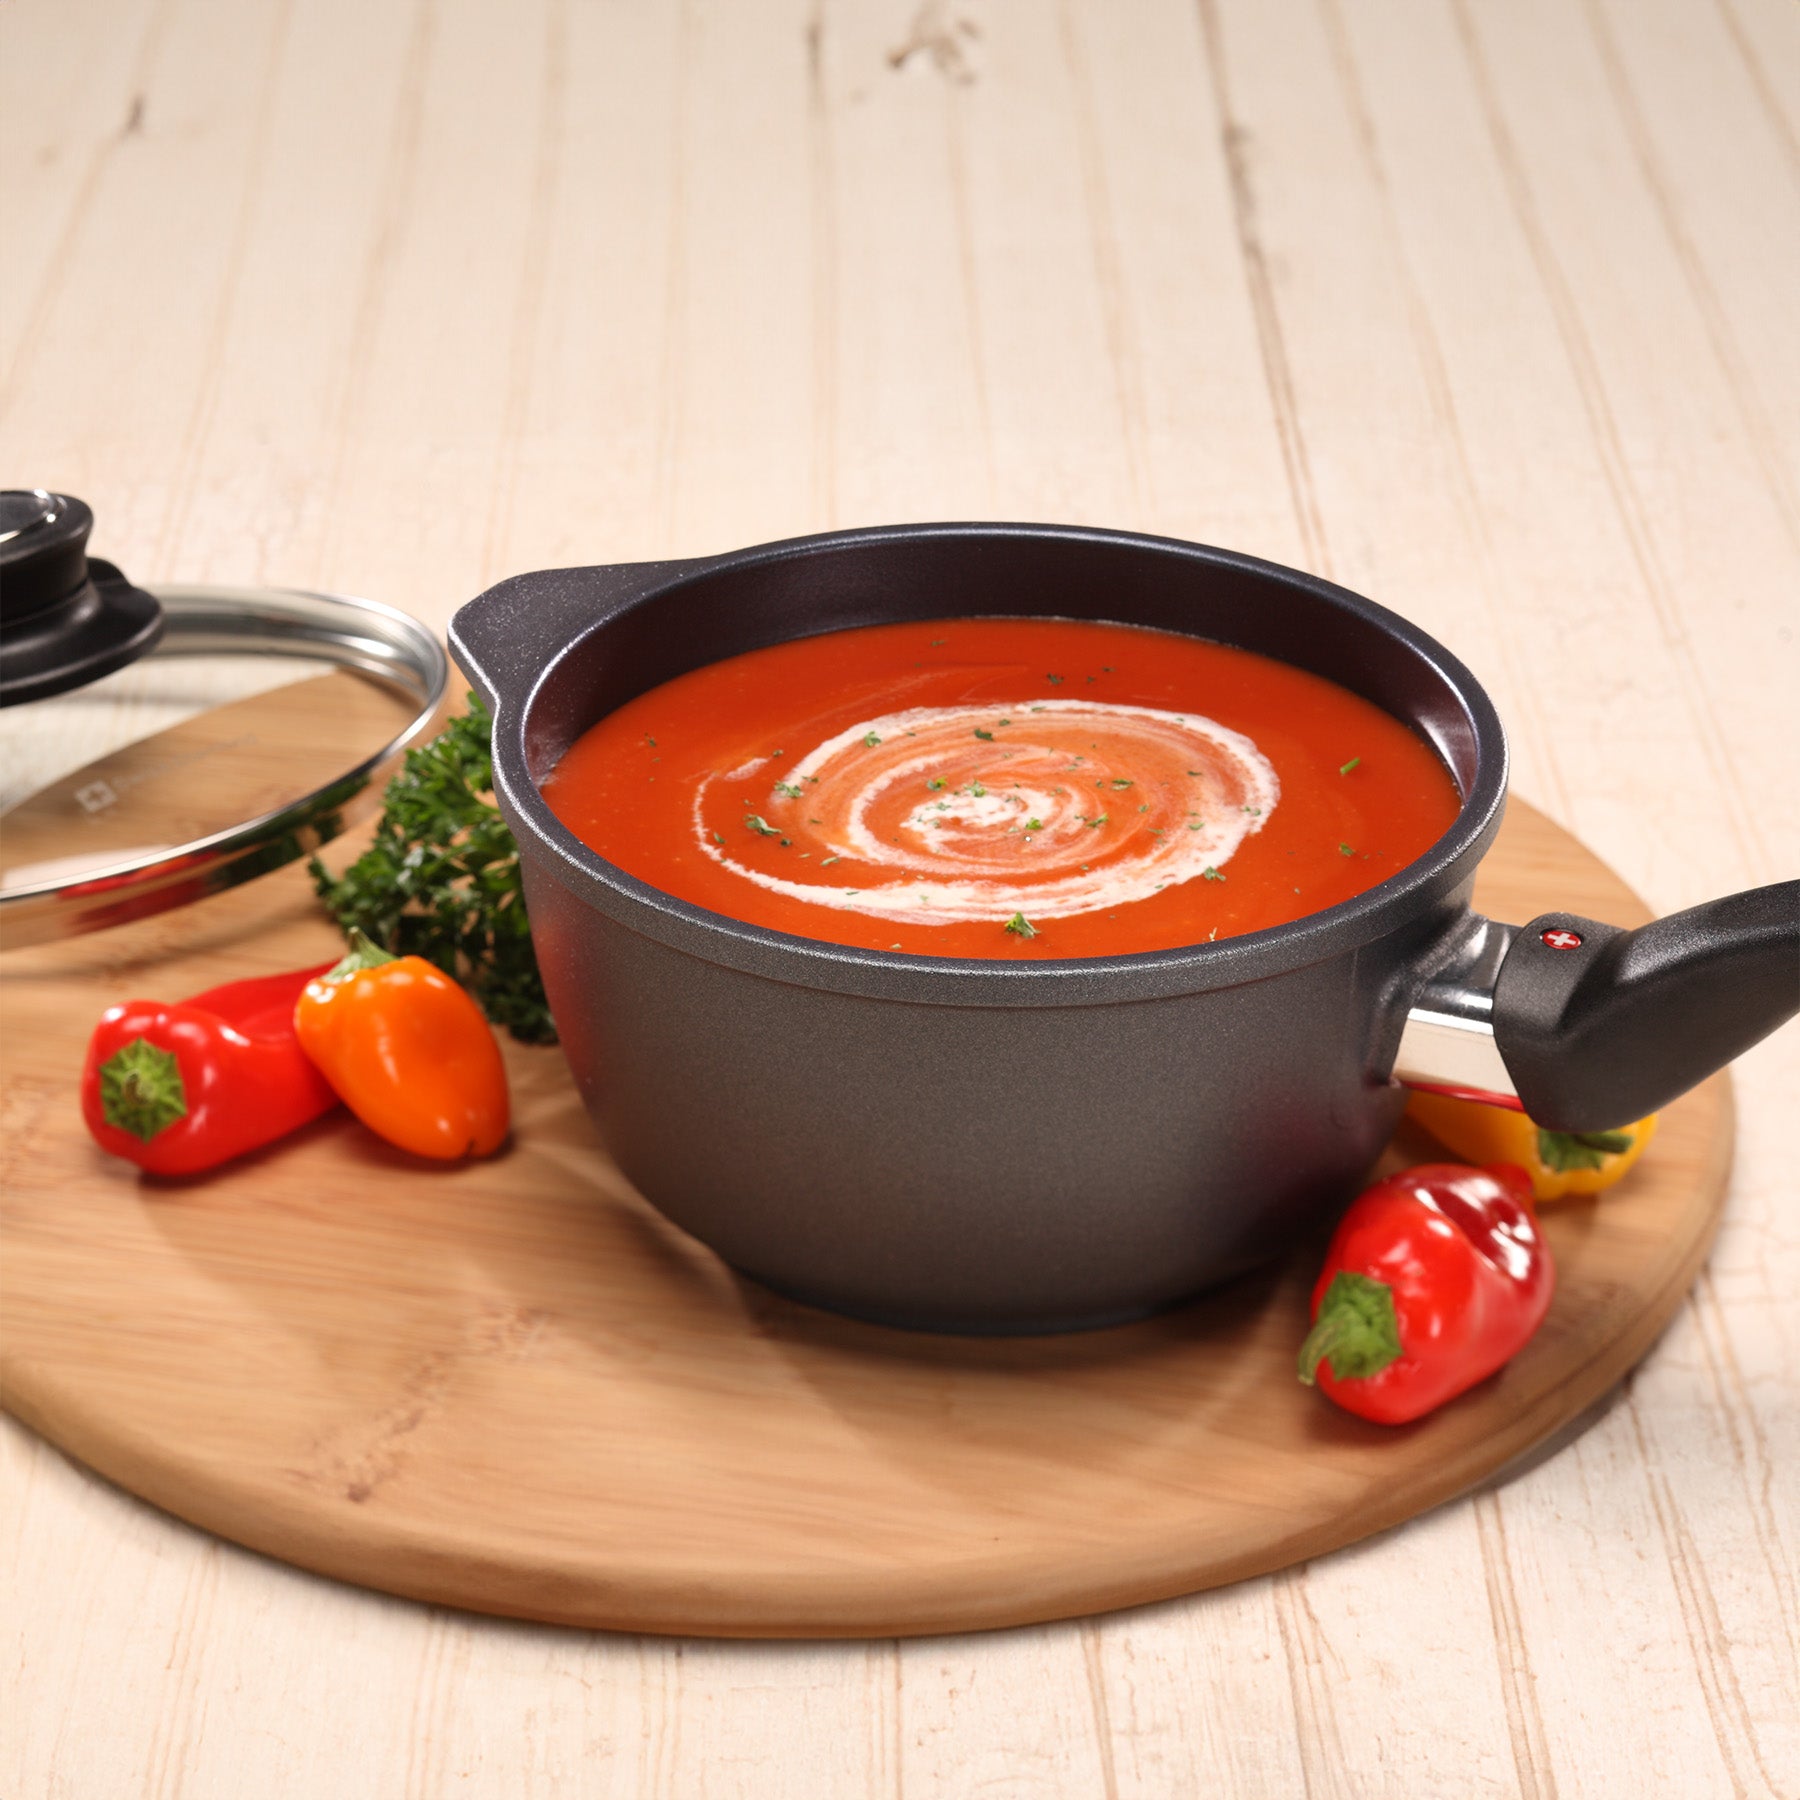 HD Nonstick Saucepan with Glass Lid in use on wooden table